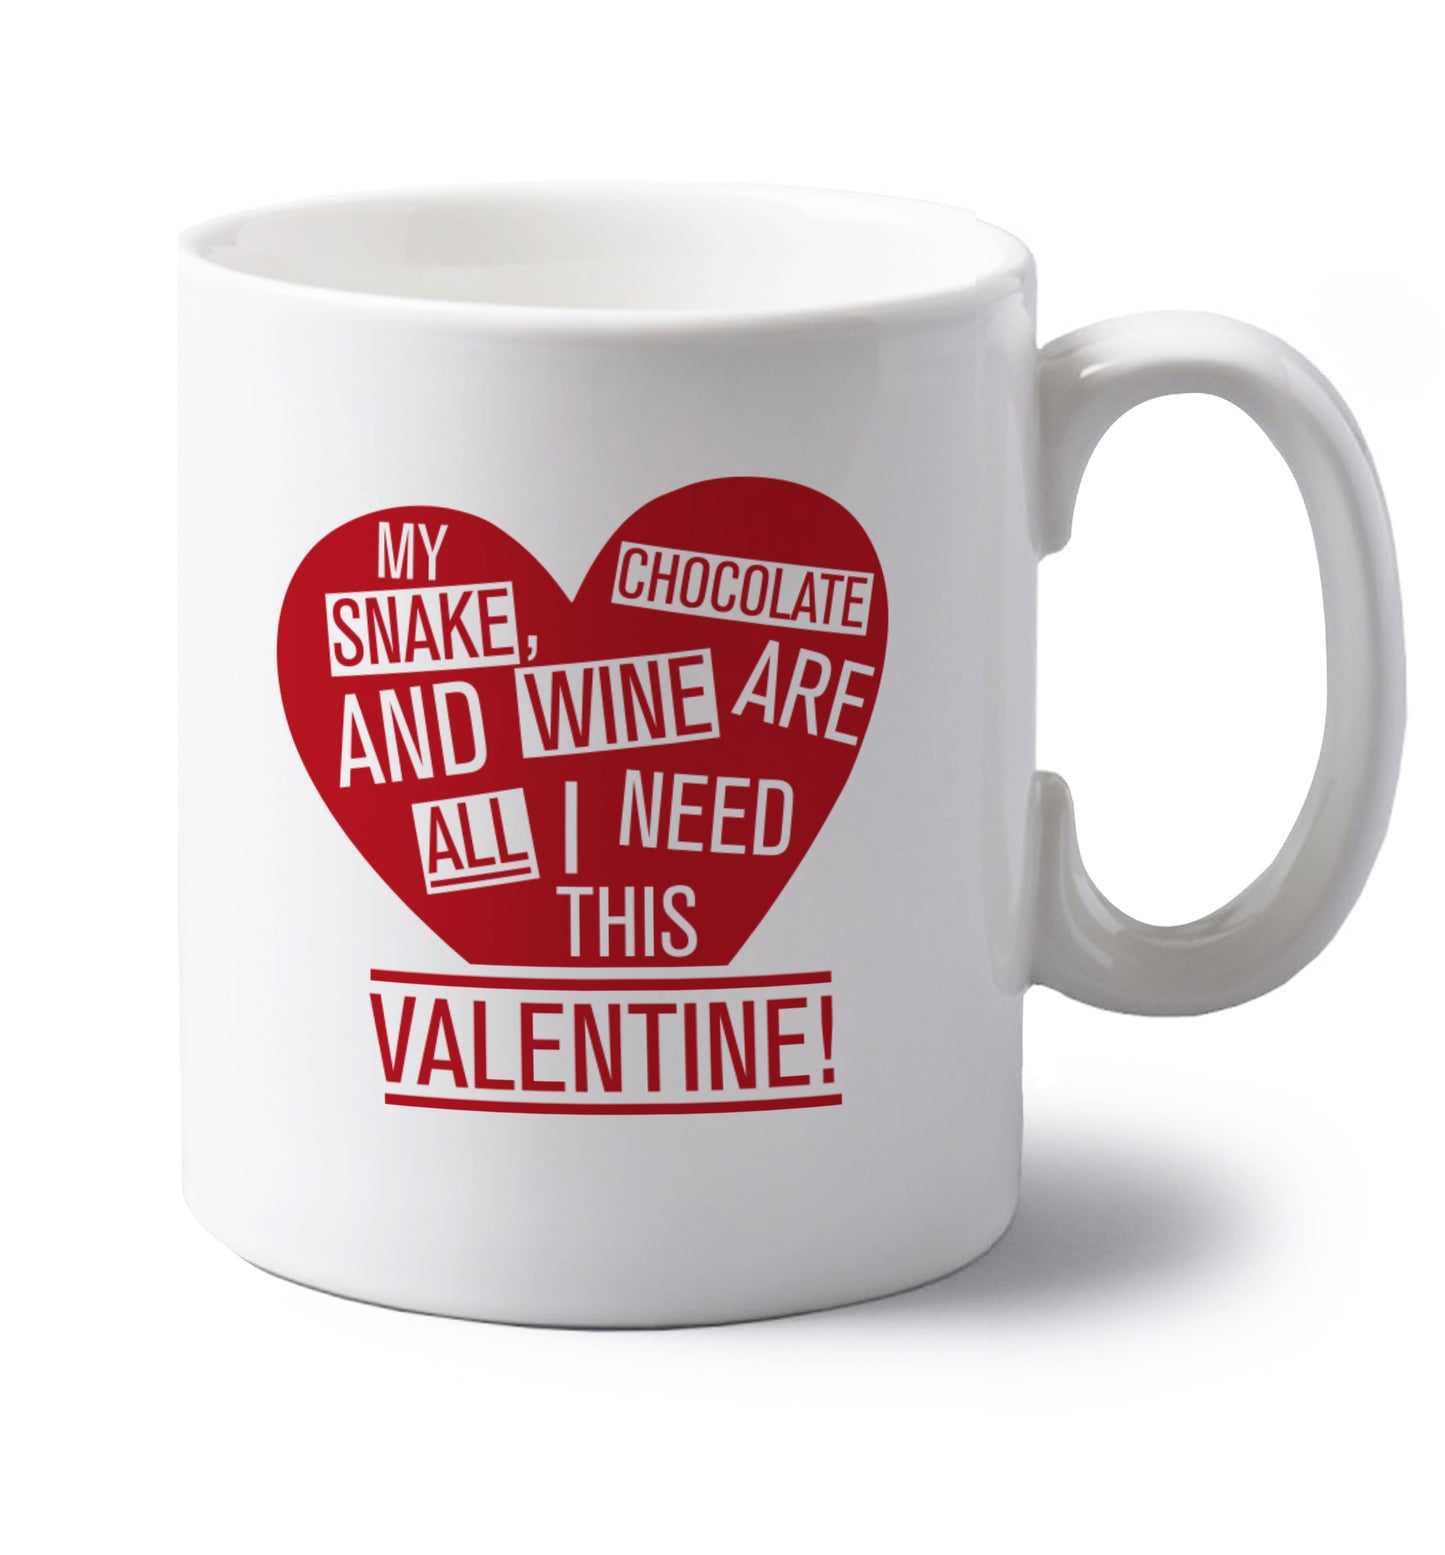 My snake, chocolate and wine are all I need this valentine! left handed white ceramic mug 